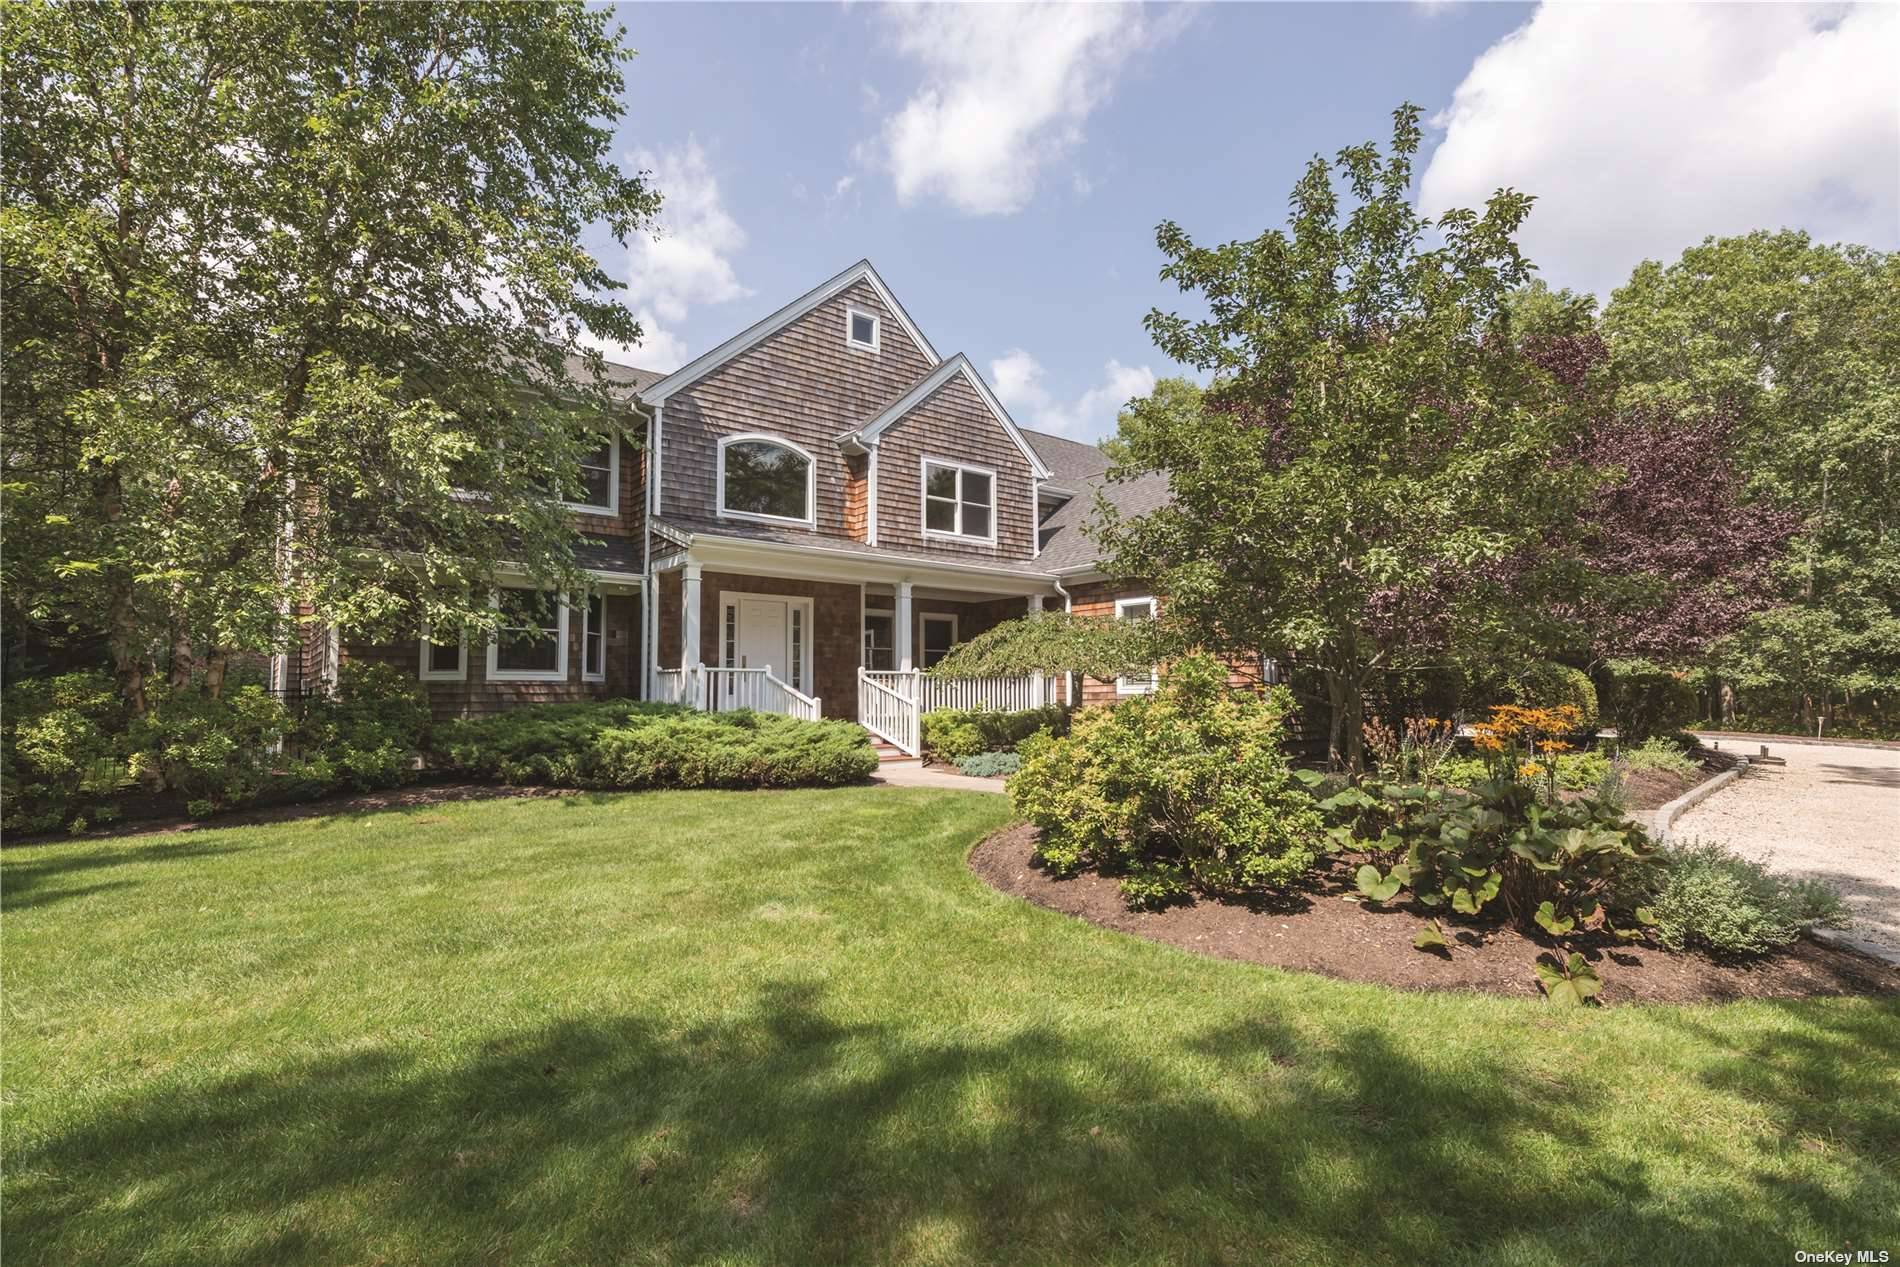 Located on a private 1. 2 acre in Quogue Village, this 4662 sq.